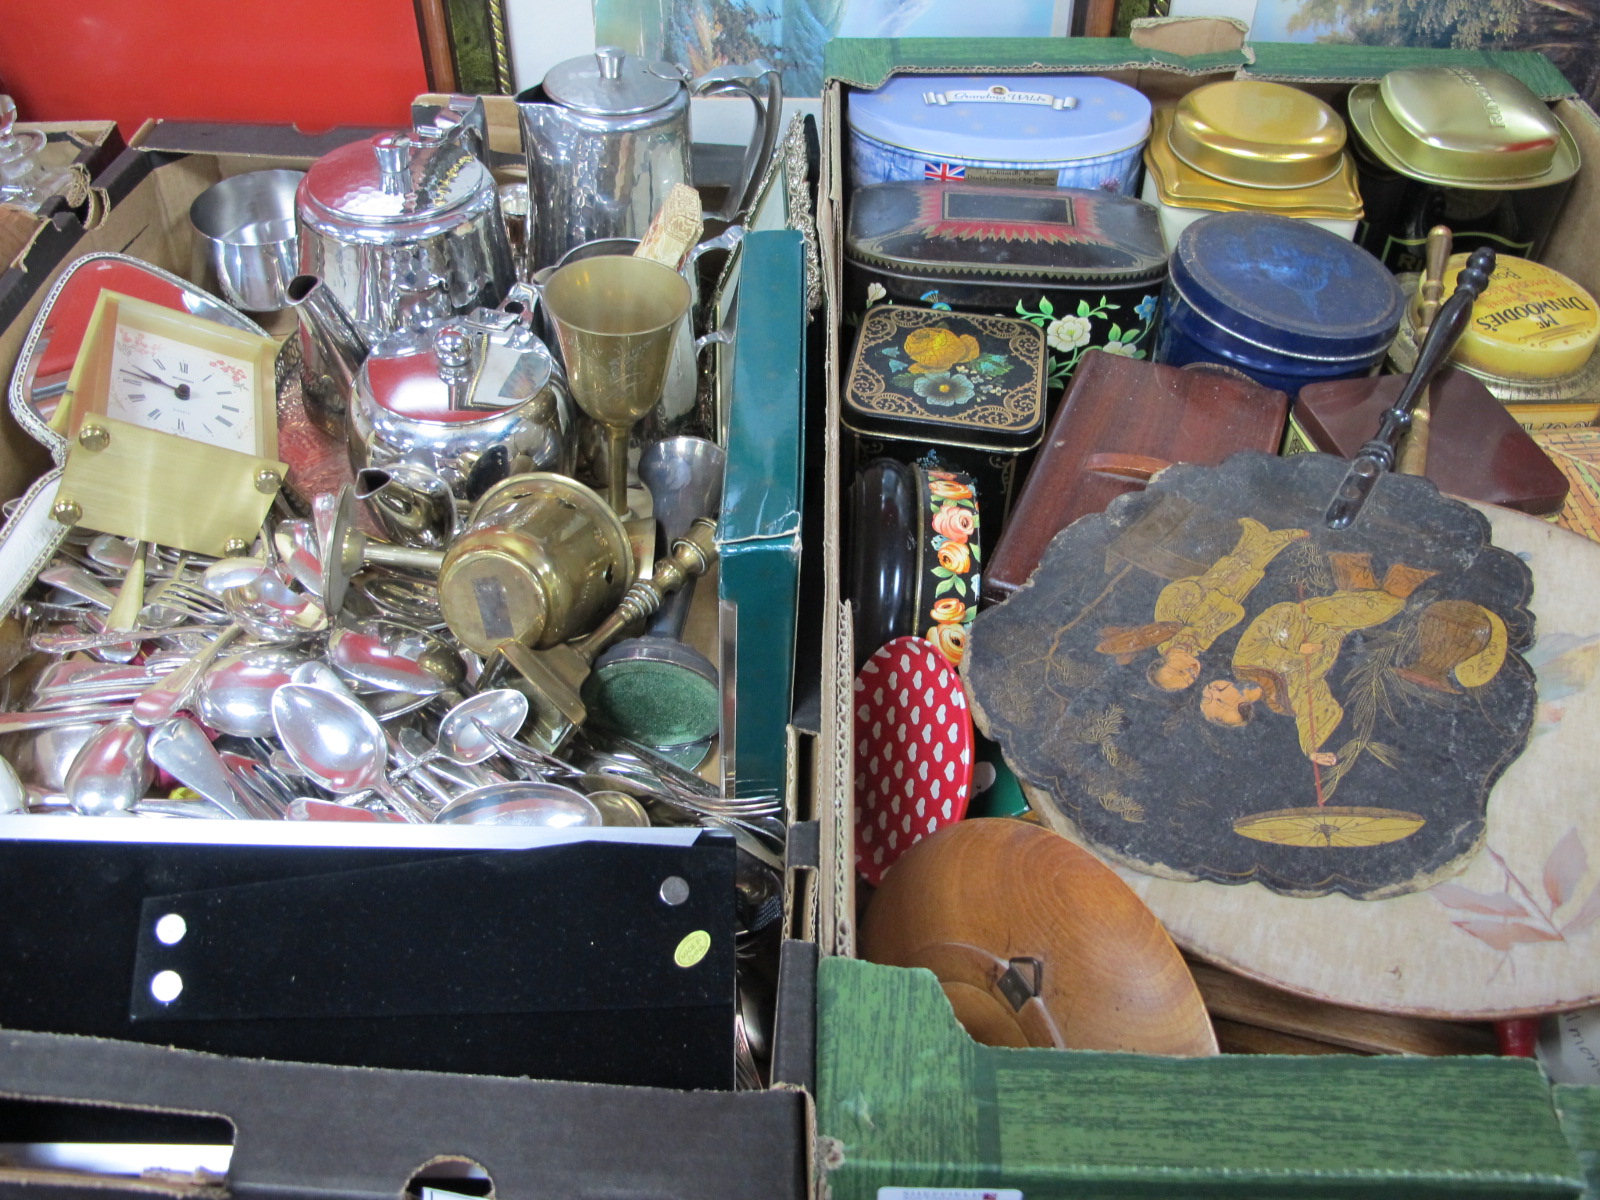 Cutlery, photograph frames, Old Hall stainless steel tea pot, hot water jug, Chinoiserie fan,